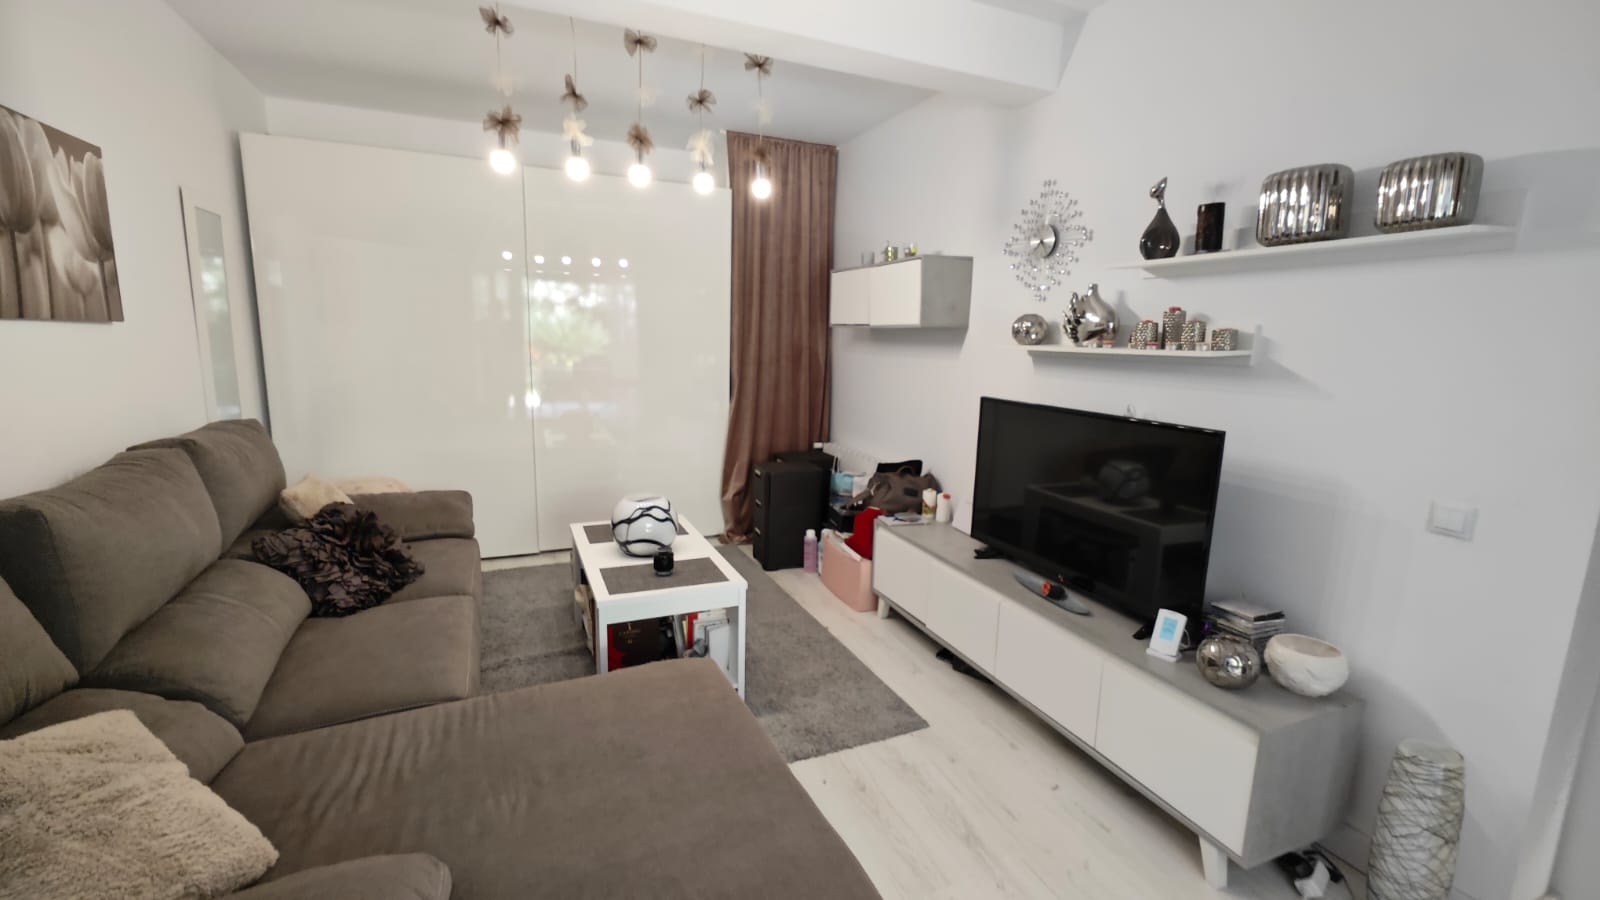 BEAUTIFUL TOWNHOUSE IN PEDREGUER